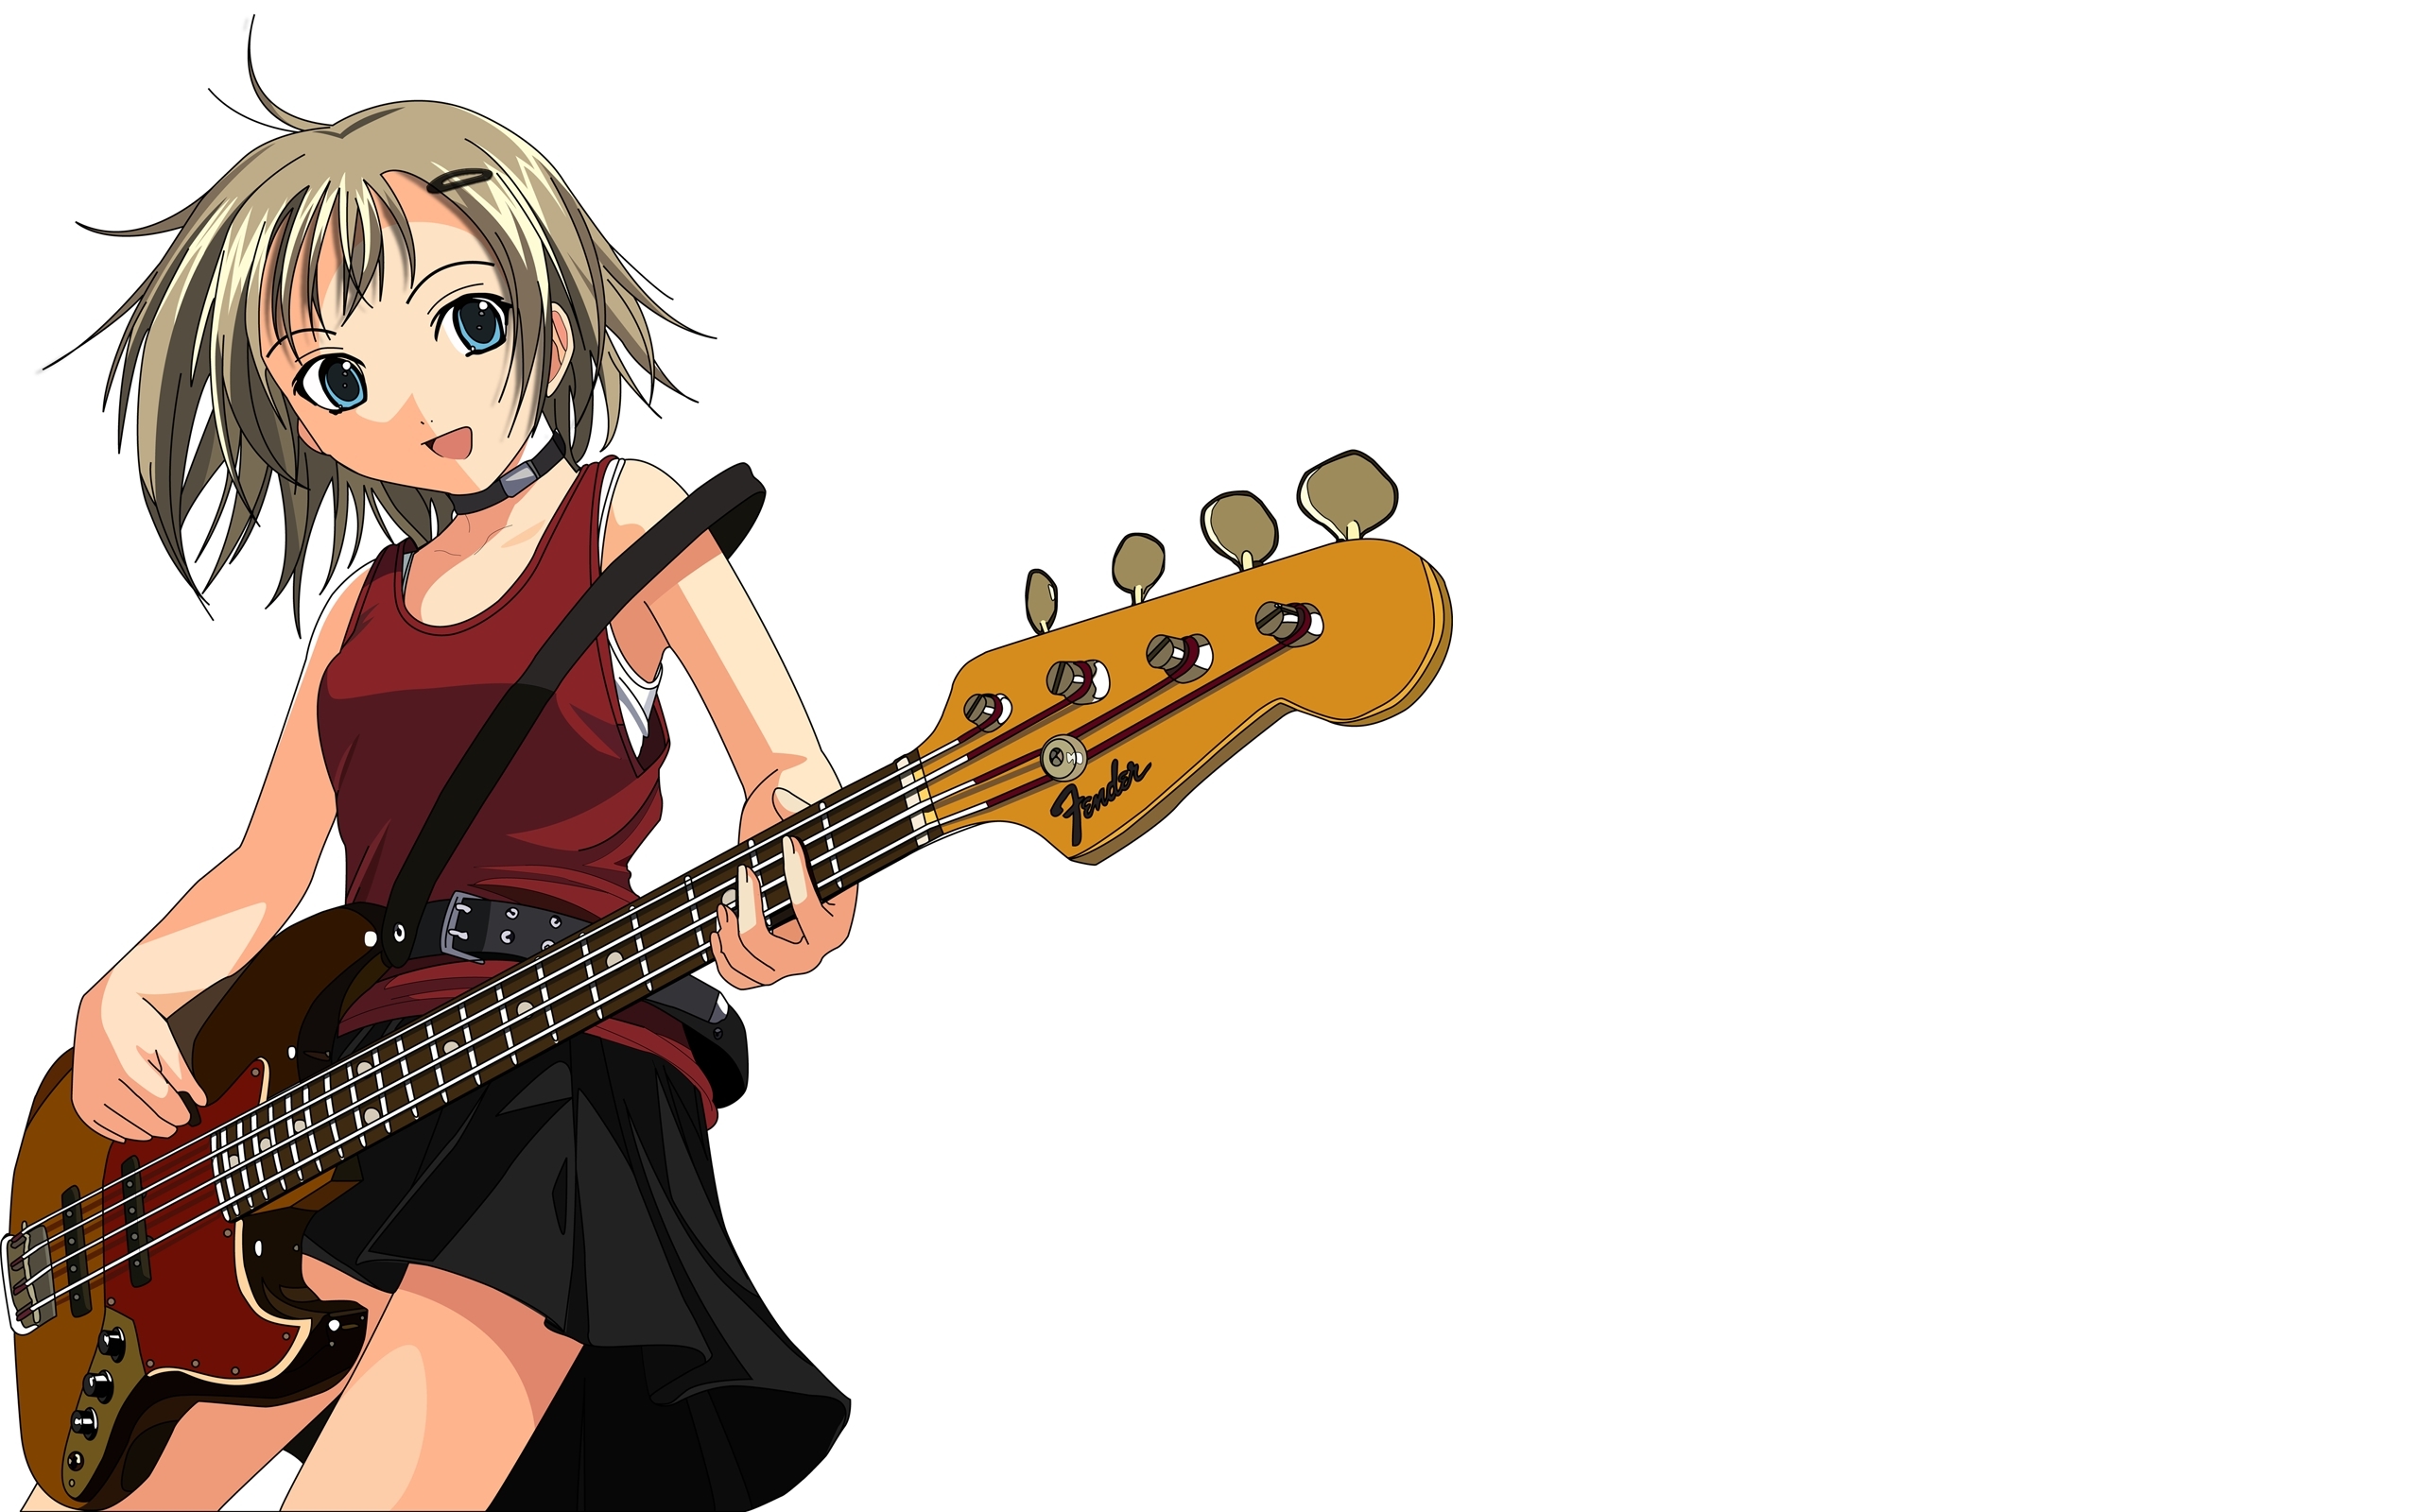 Cute Anime Girl With Guitar Wallpaper Wallpaper - Anime Girl Playing Guitar Bass , HD Wallpaper & Backgrounds